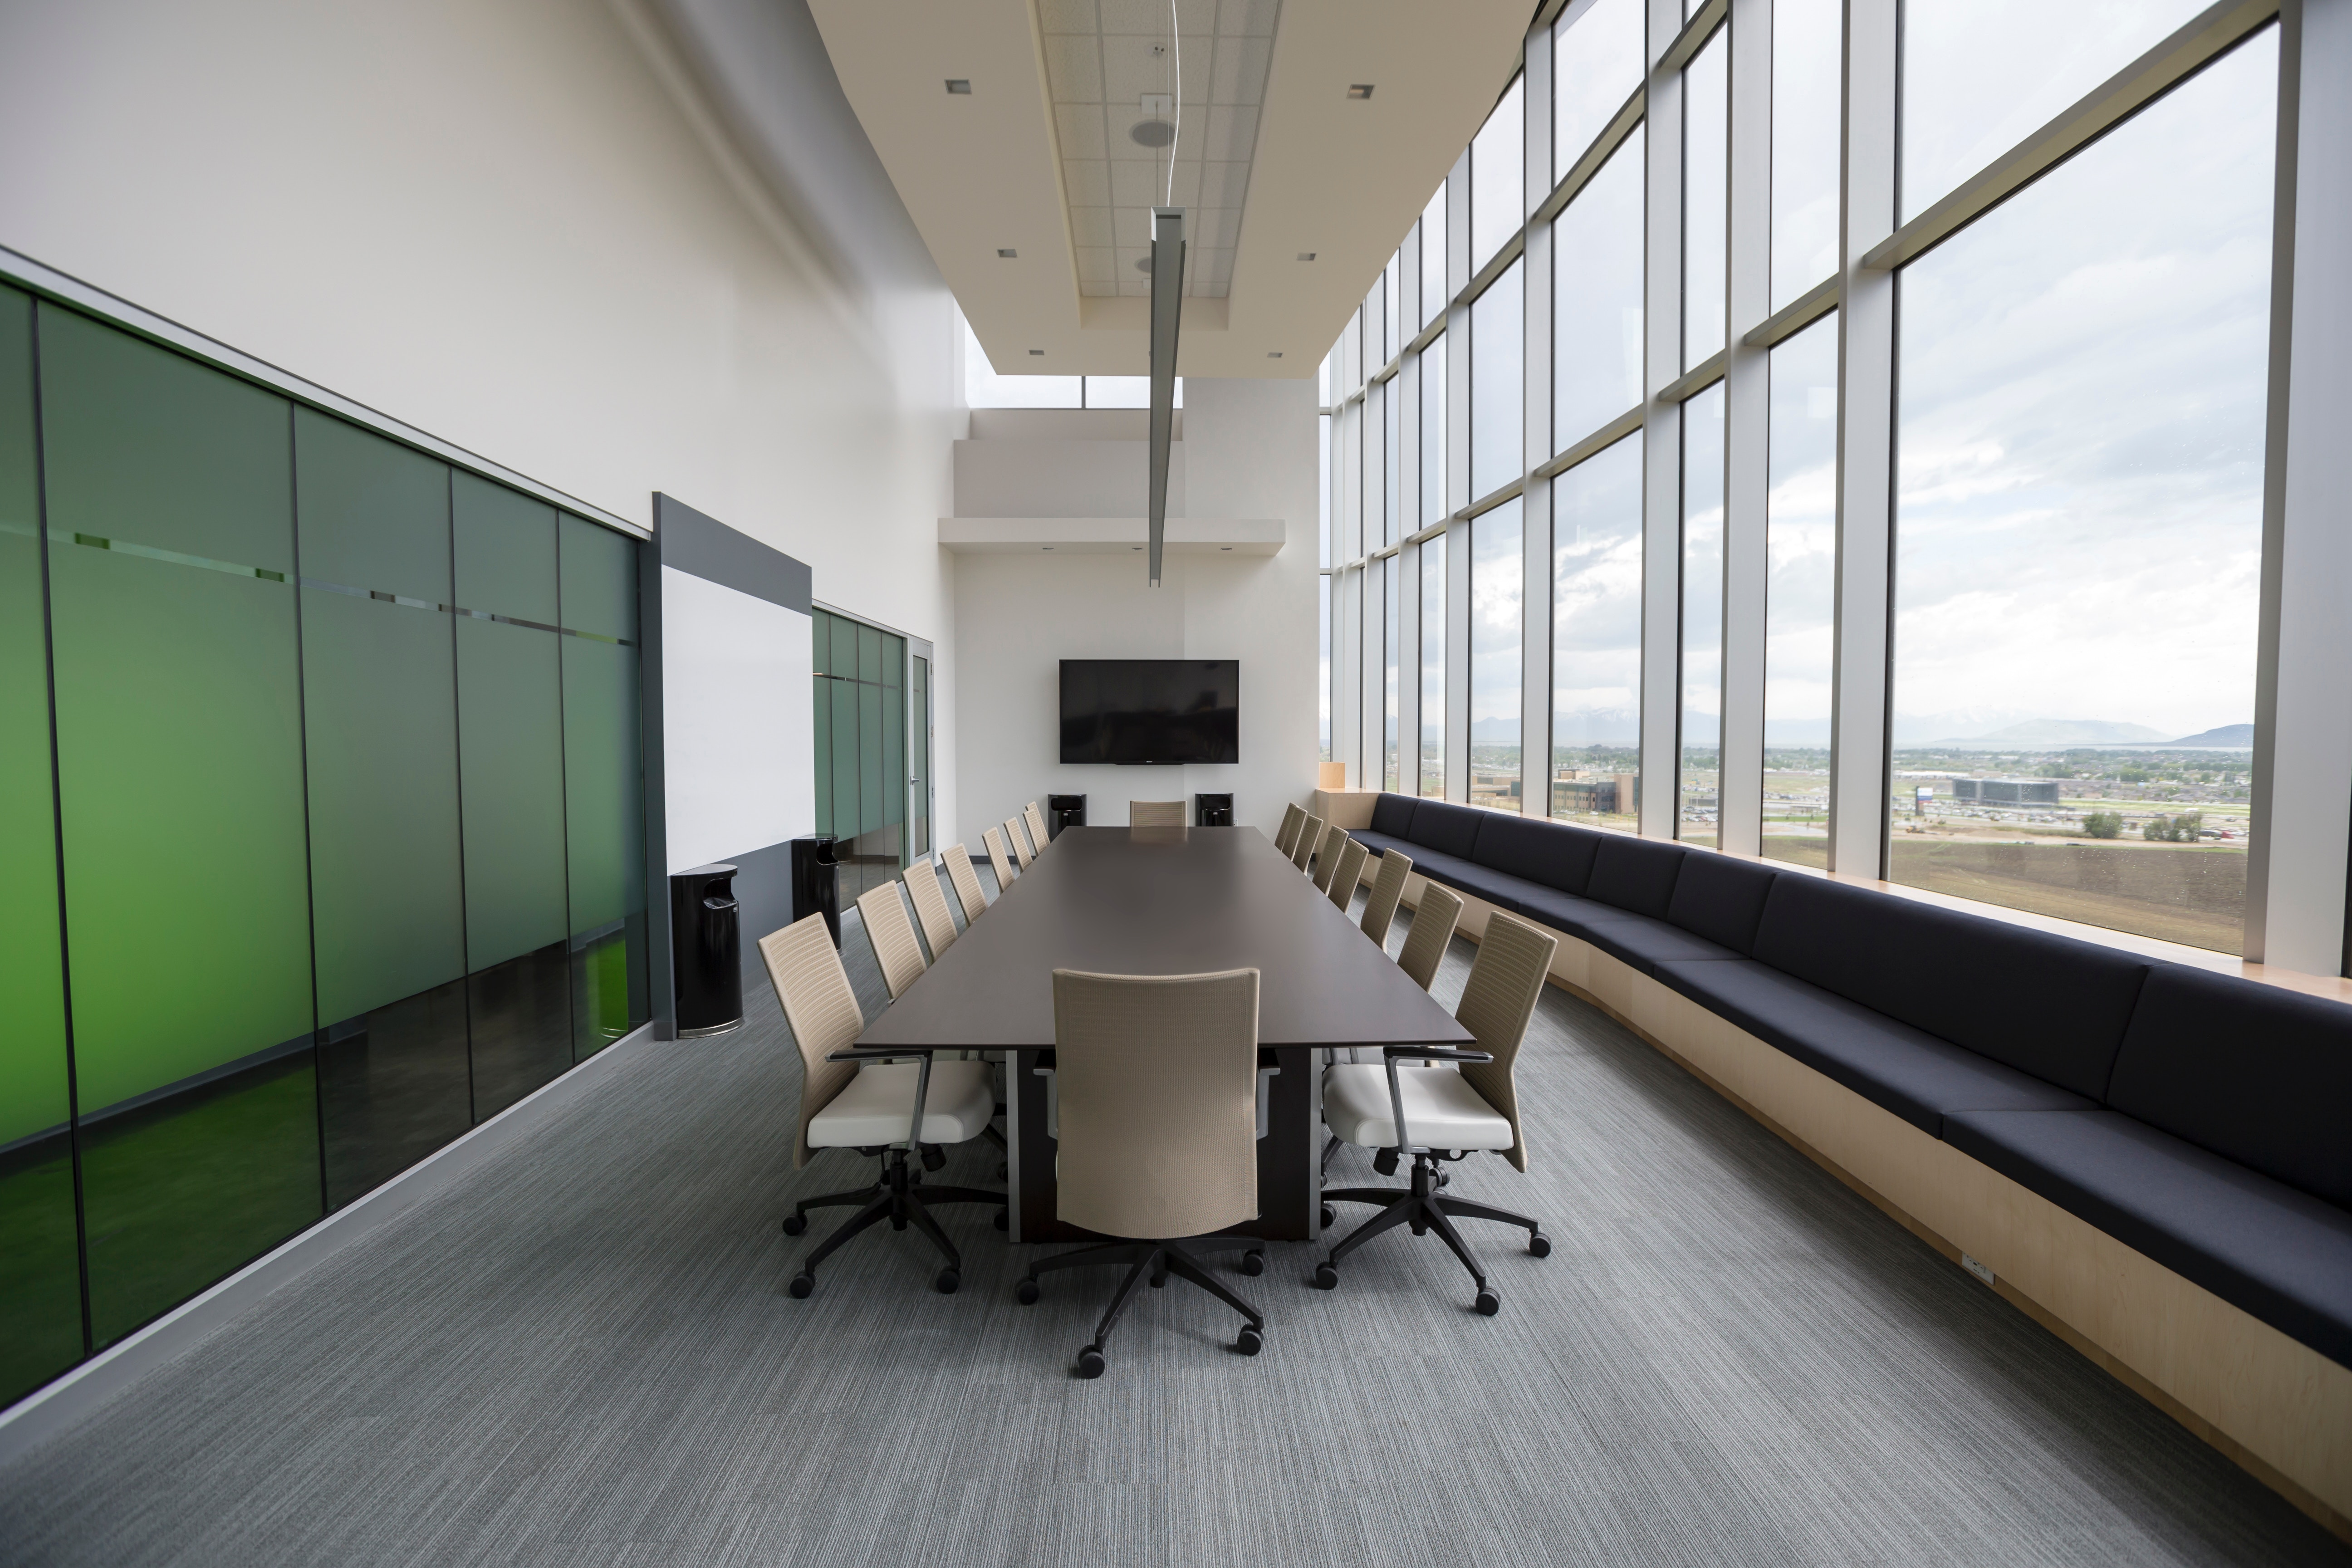 5184x3456 #table, #room, #PNG image, #window, #boardroom, #chair, #building, #glass, #green, #long, #light, #empty, #city, #view, #comfortable, #office, #meeting, #decor, #furniture, #meeting room, #interior. Mocah HD Wallpaper